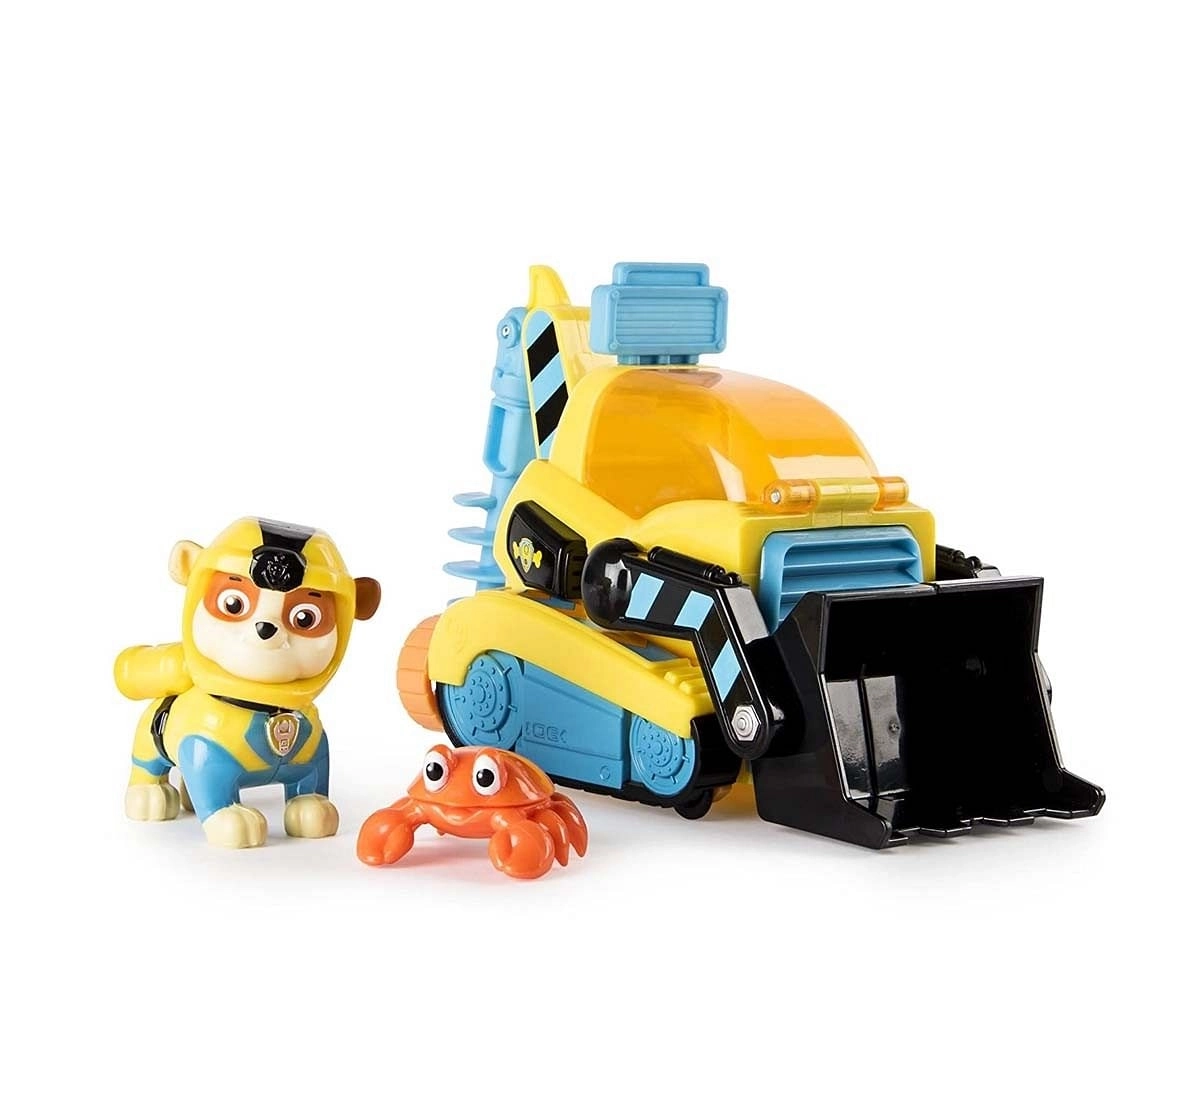 Paw Patrol Basic Vehicles Assorted Activity Toys for Kids age 3Y+ 